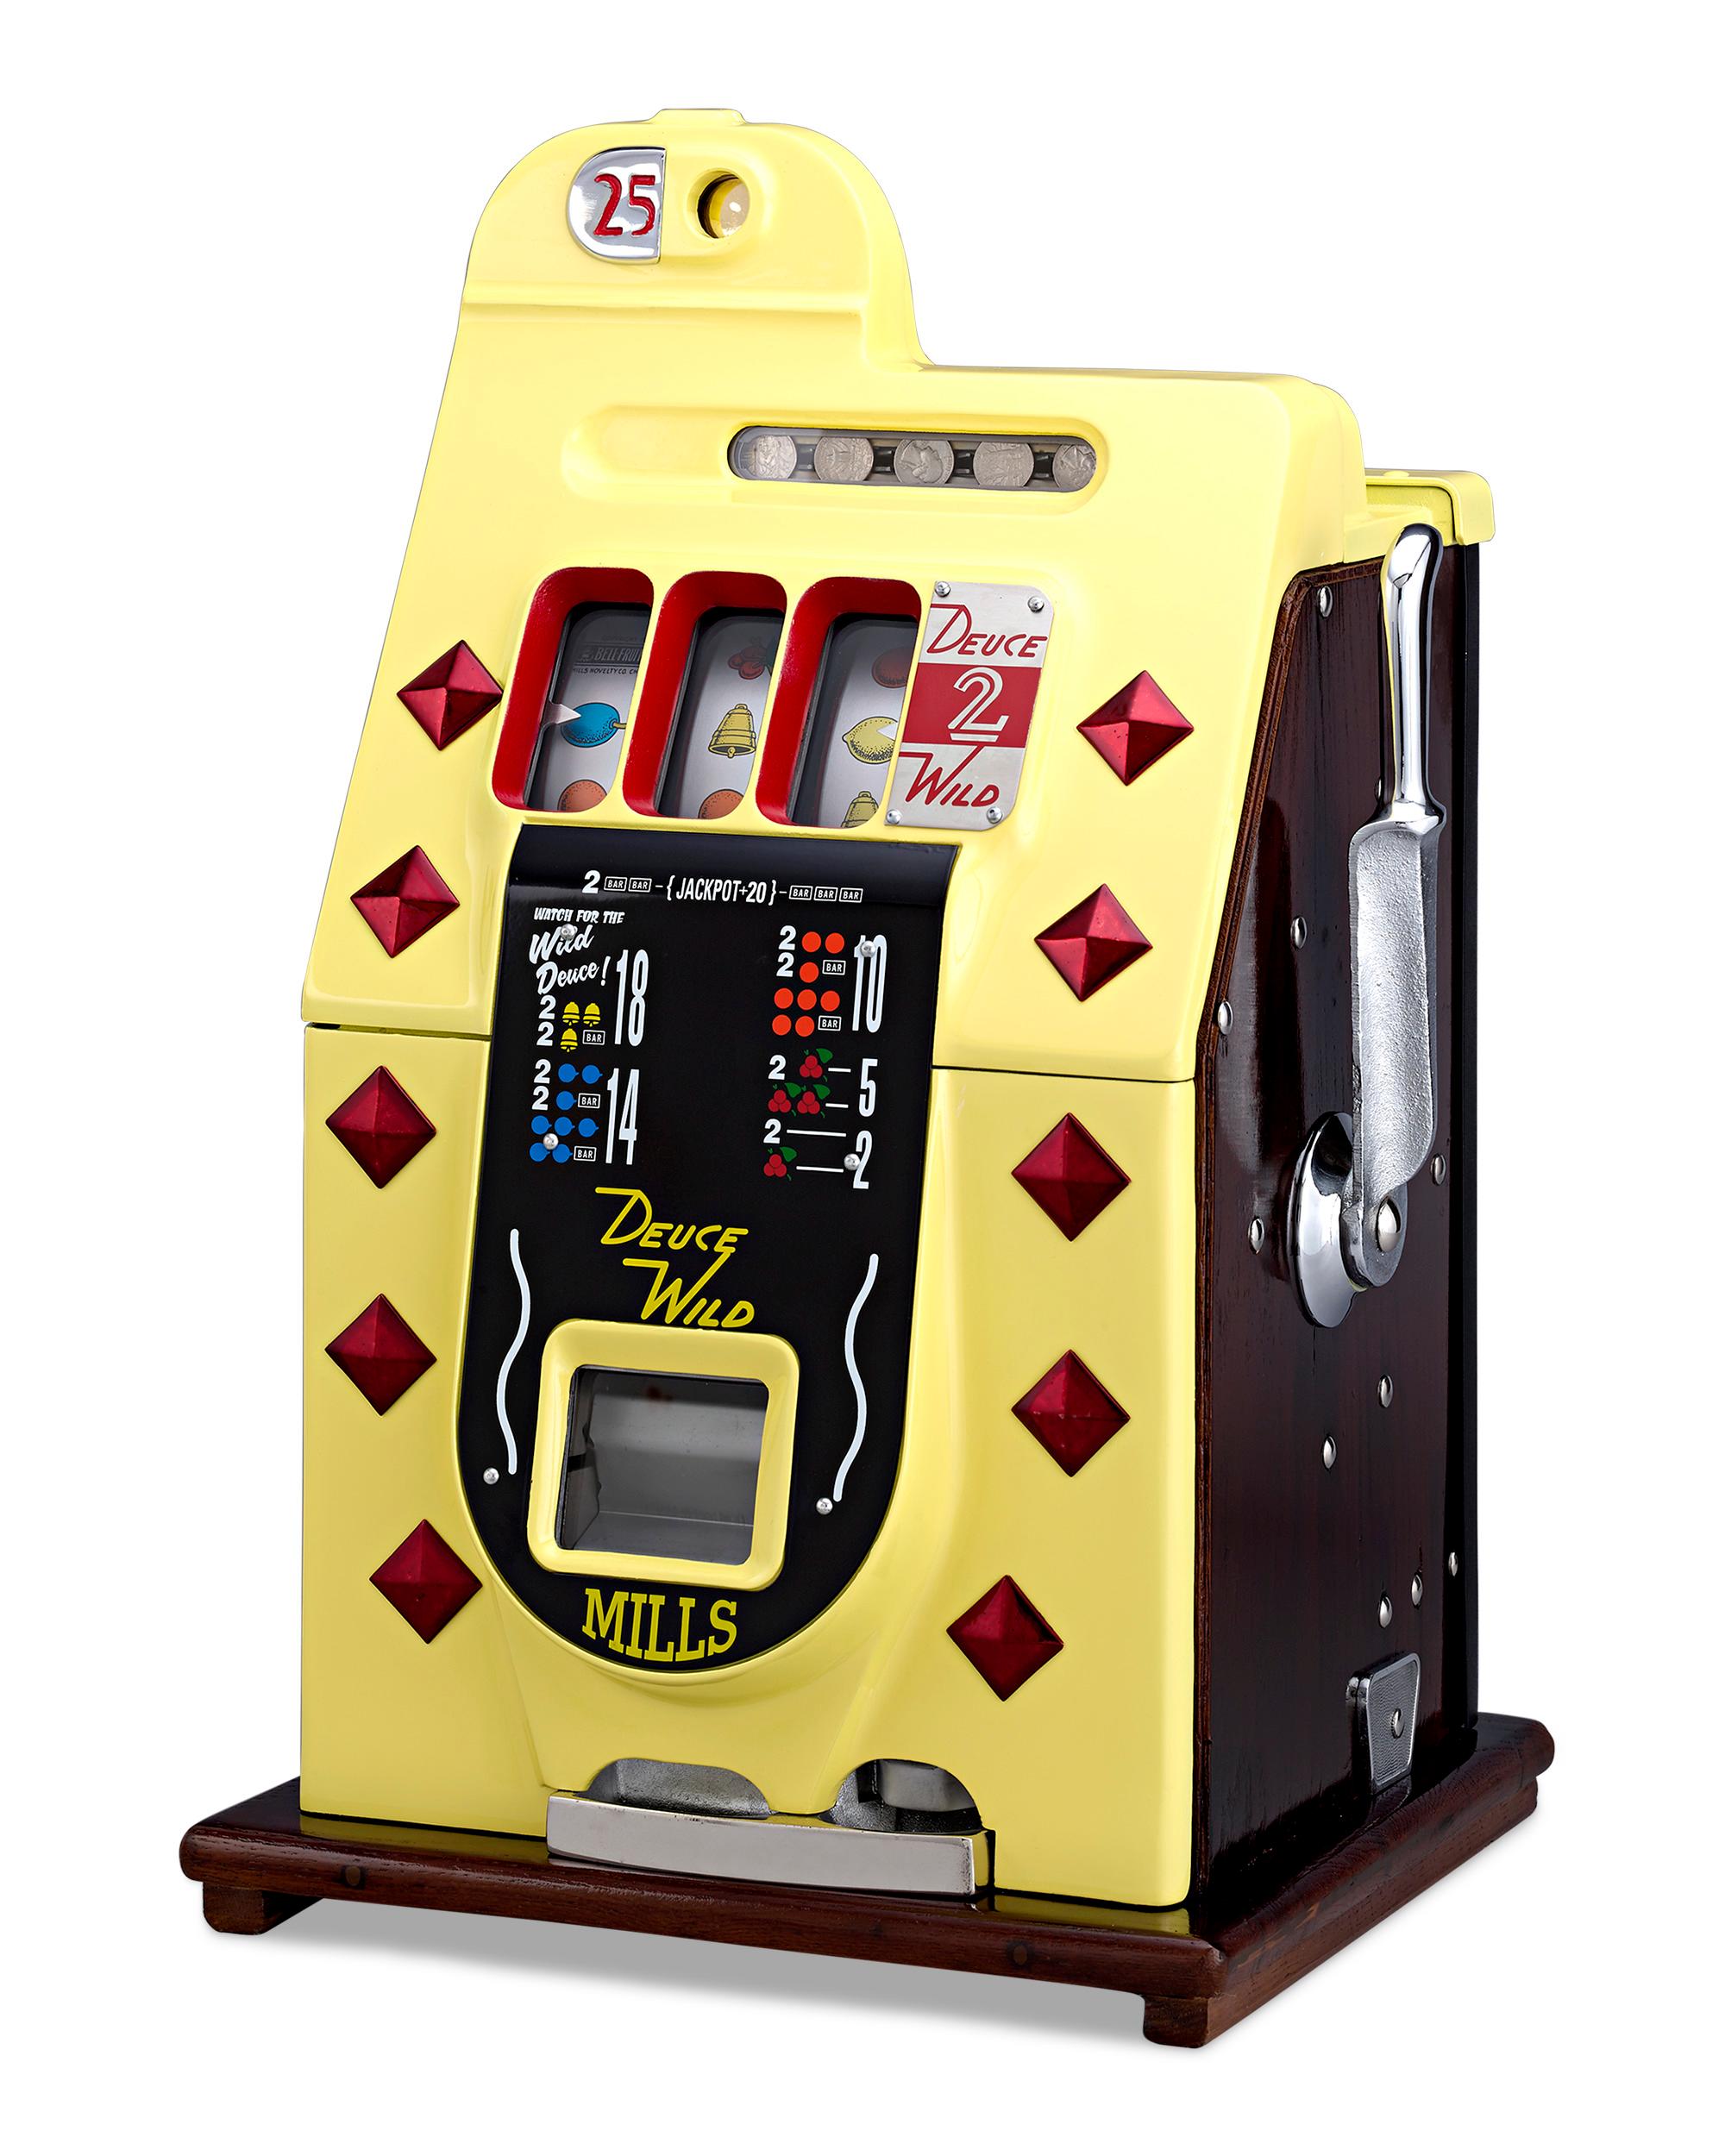 Created by the Mills Novelty Company of Chicago, this rare 25-cent deuces wild diamond front slot machine is a nostalgic piece of Americana. Visually enticing with its brilliant yellow and red color palette, this slot machine is crafted of cast iron